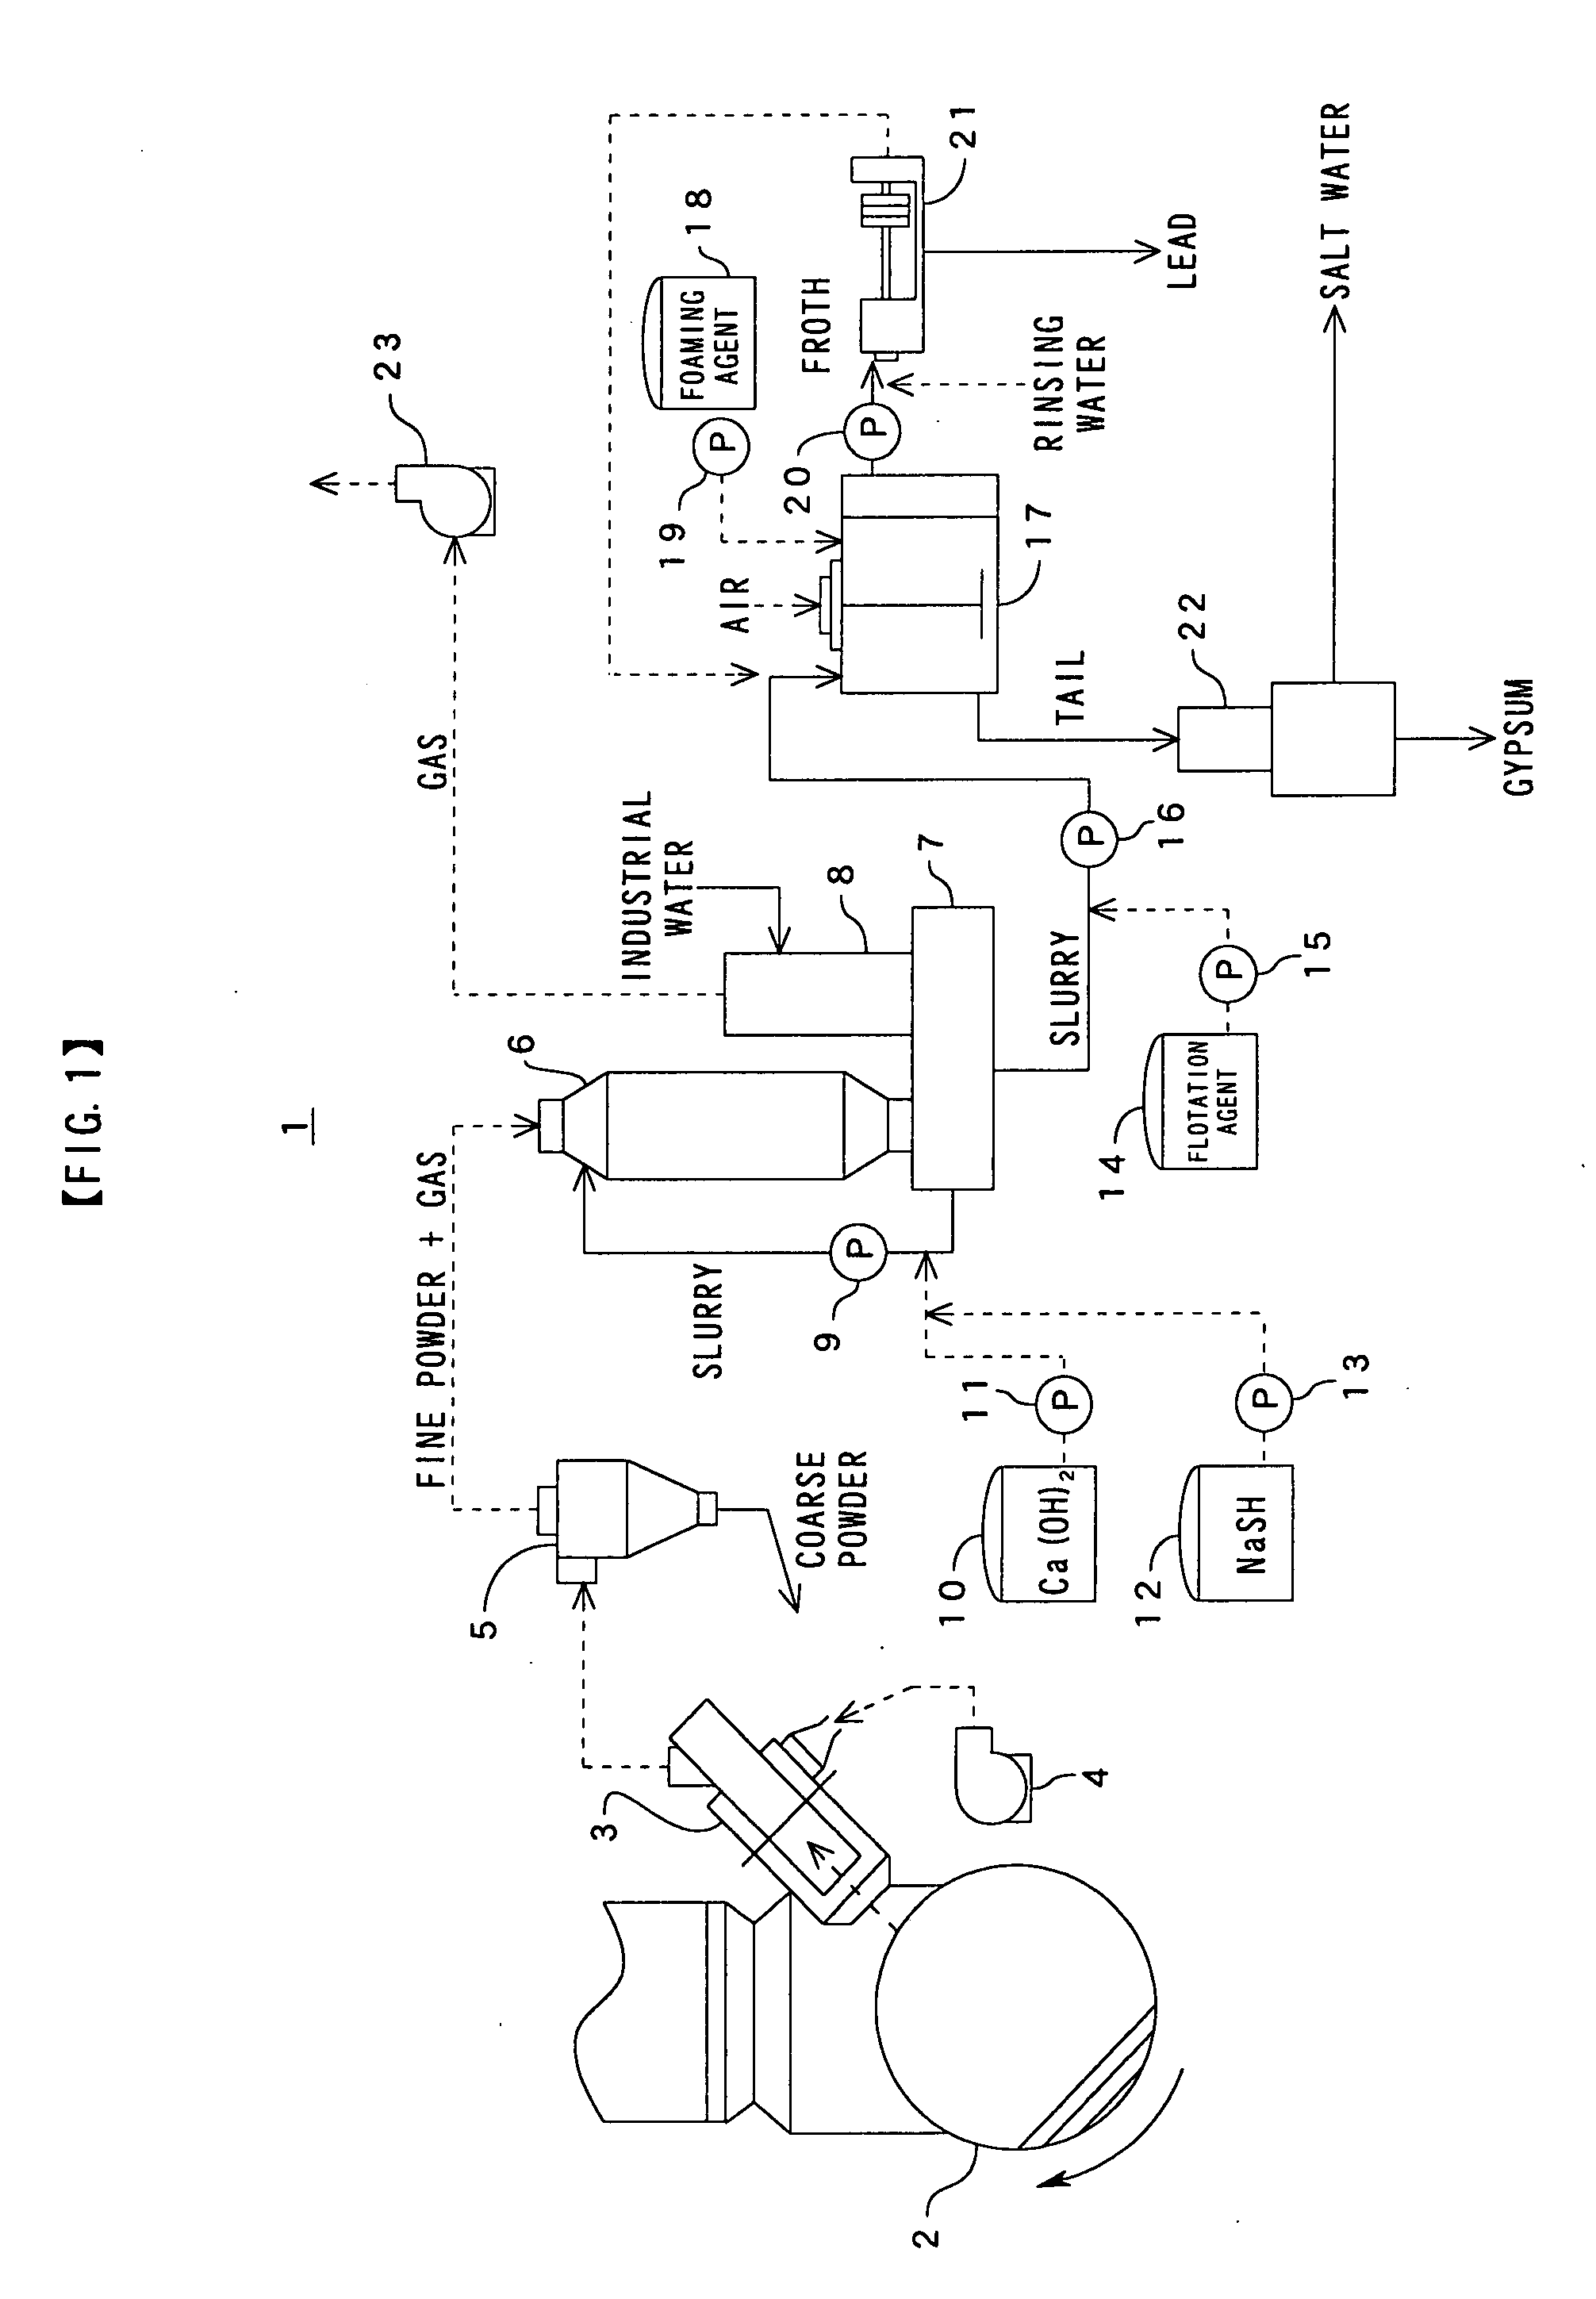 System and Method for Treating Dust Contained in Extracted Cement Kiln Combustion Gas